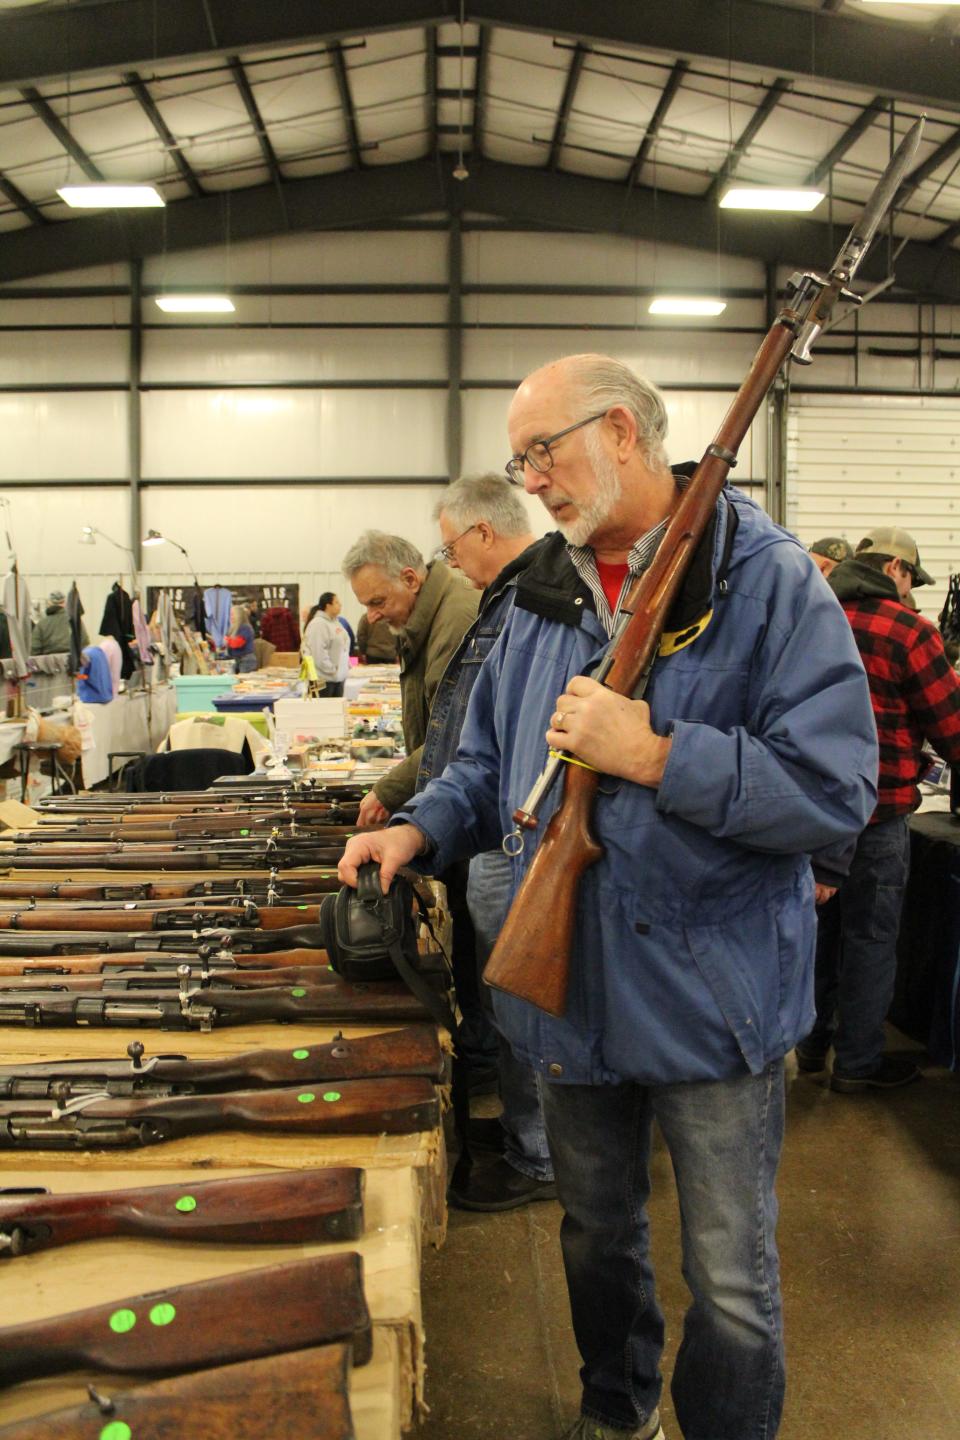 Ohio resident Steve Sauder walked the aisles at the Monroe Gun & Knife Show carrying a Swiss 1911 rifle with a bayonet and ammunition he was hoping to sell for $1,100. Provided by Kennedy Bowling